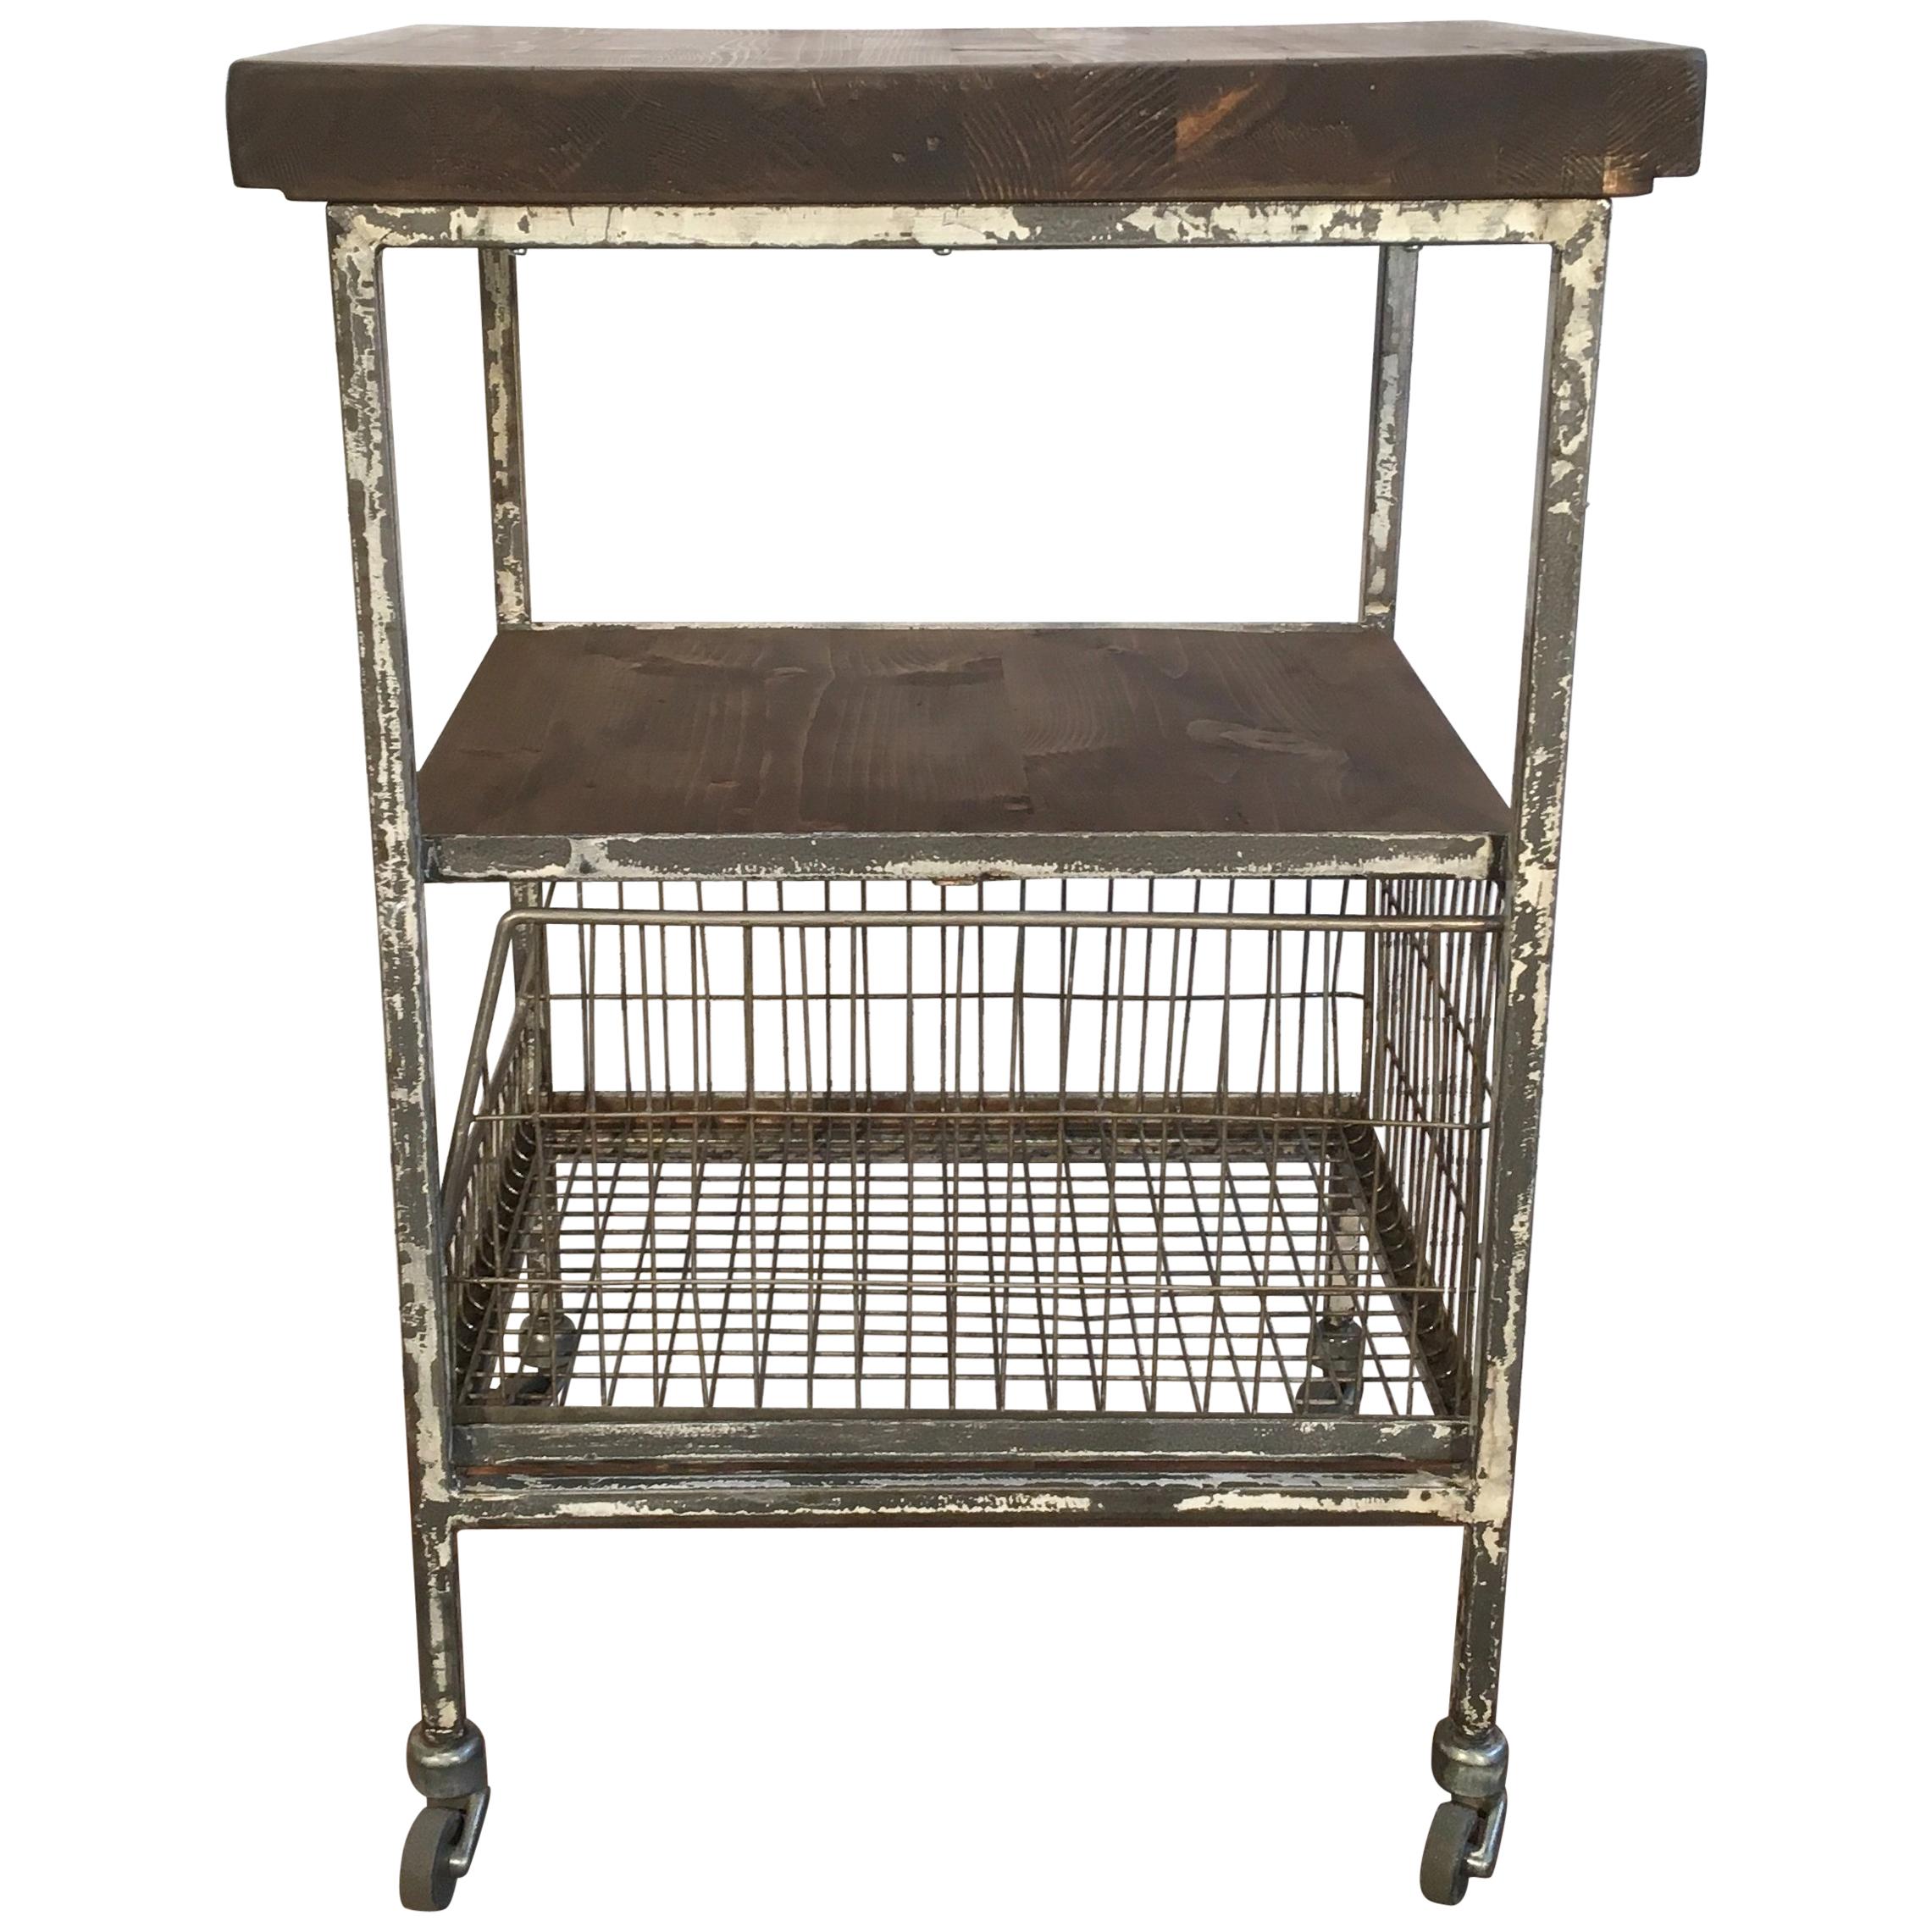 Vintage Industrial Cart With Shelves, 1960s